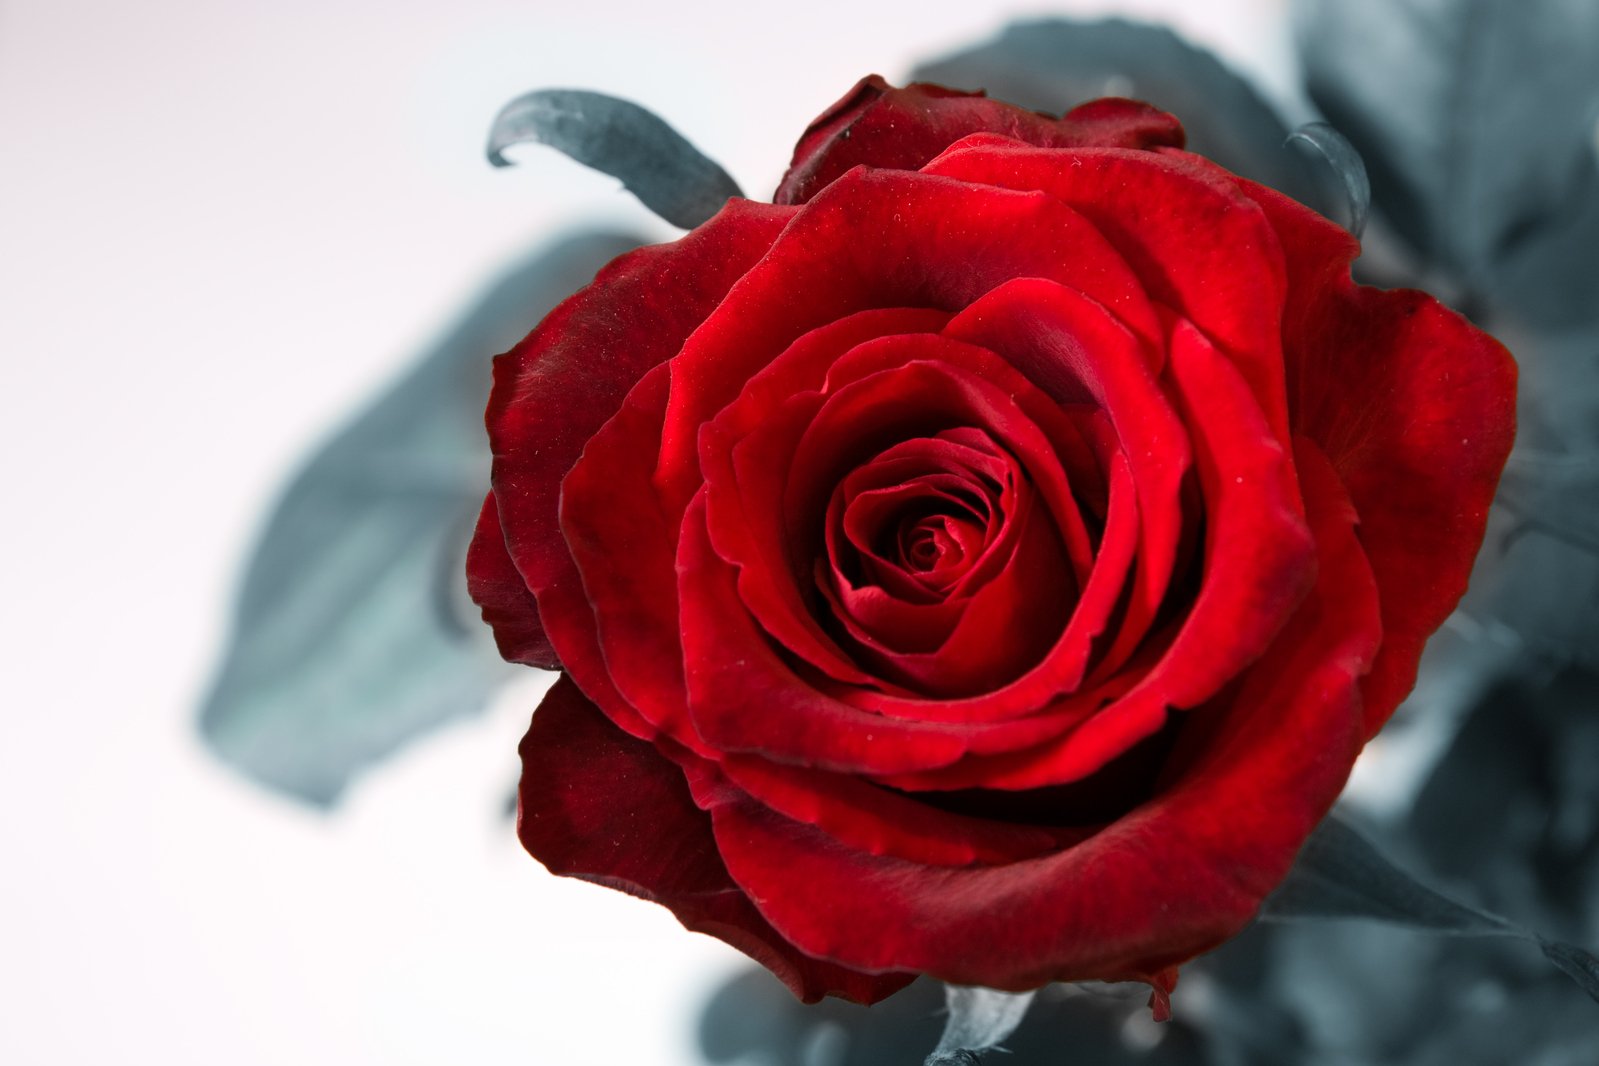 a red rose is shown with its petals open